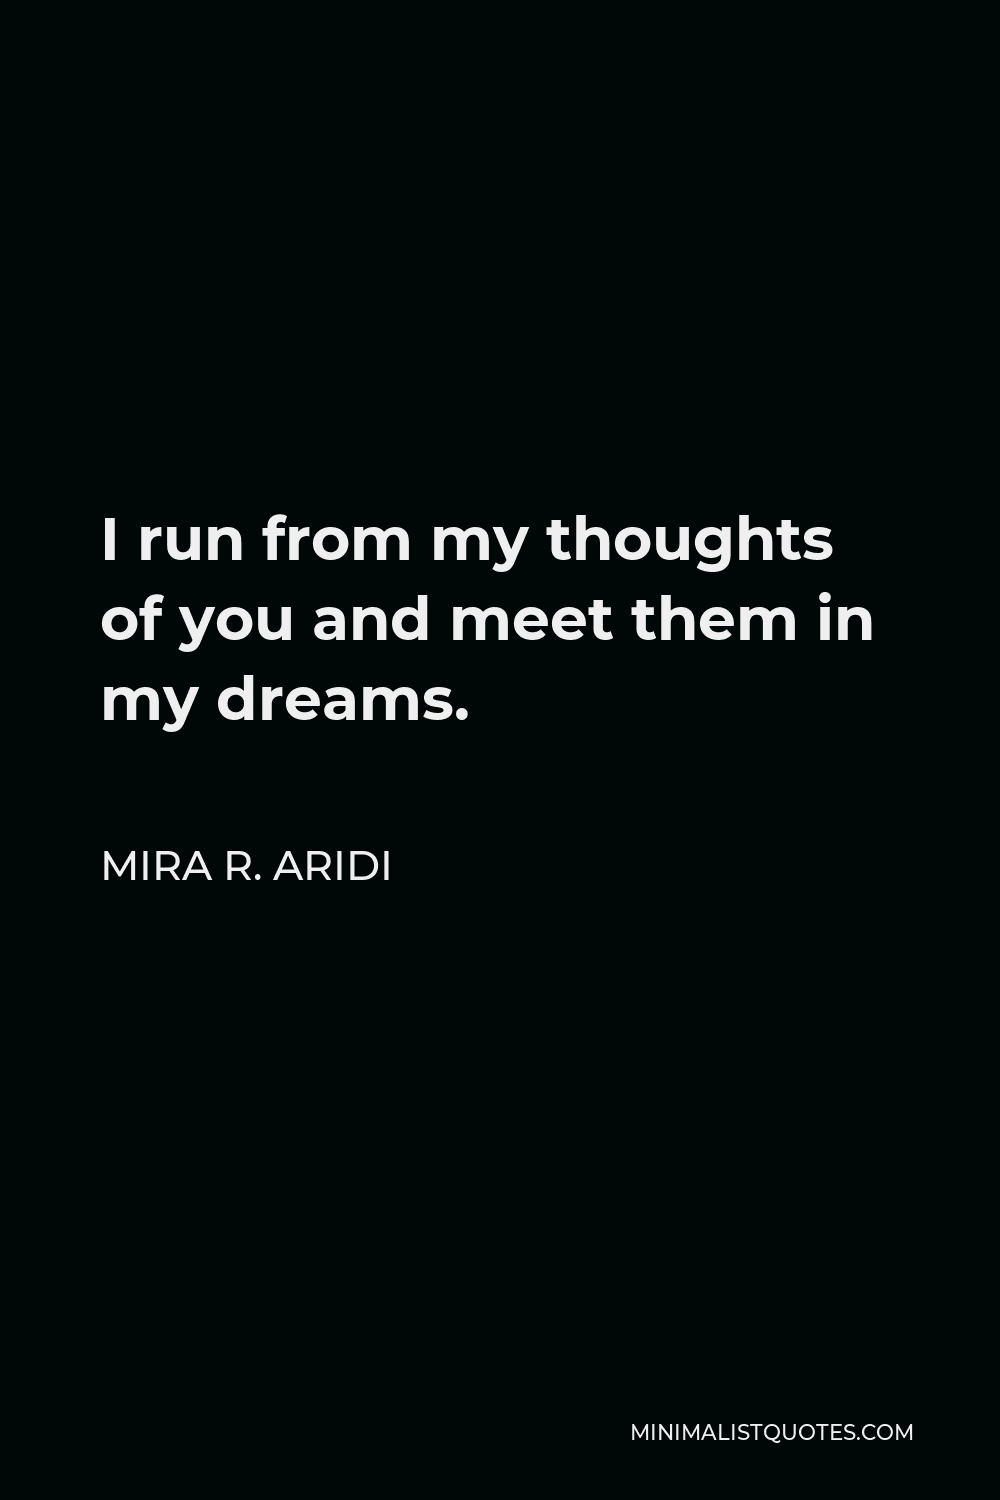 Mira R. Aridi Quote - I run from my thoughts of you and meet them in my dreams.